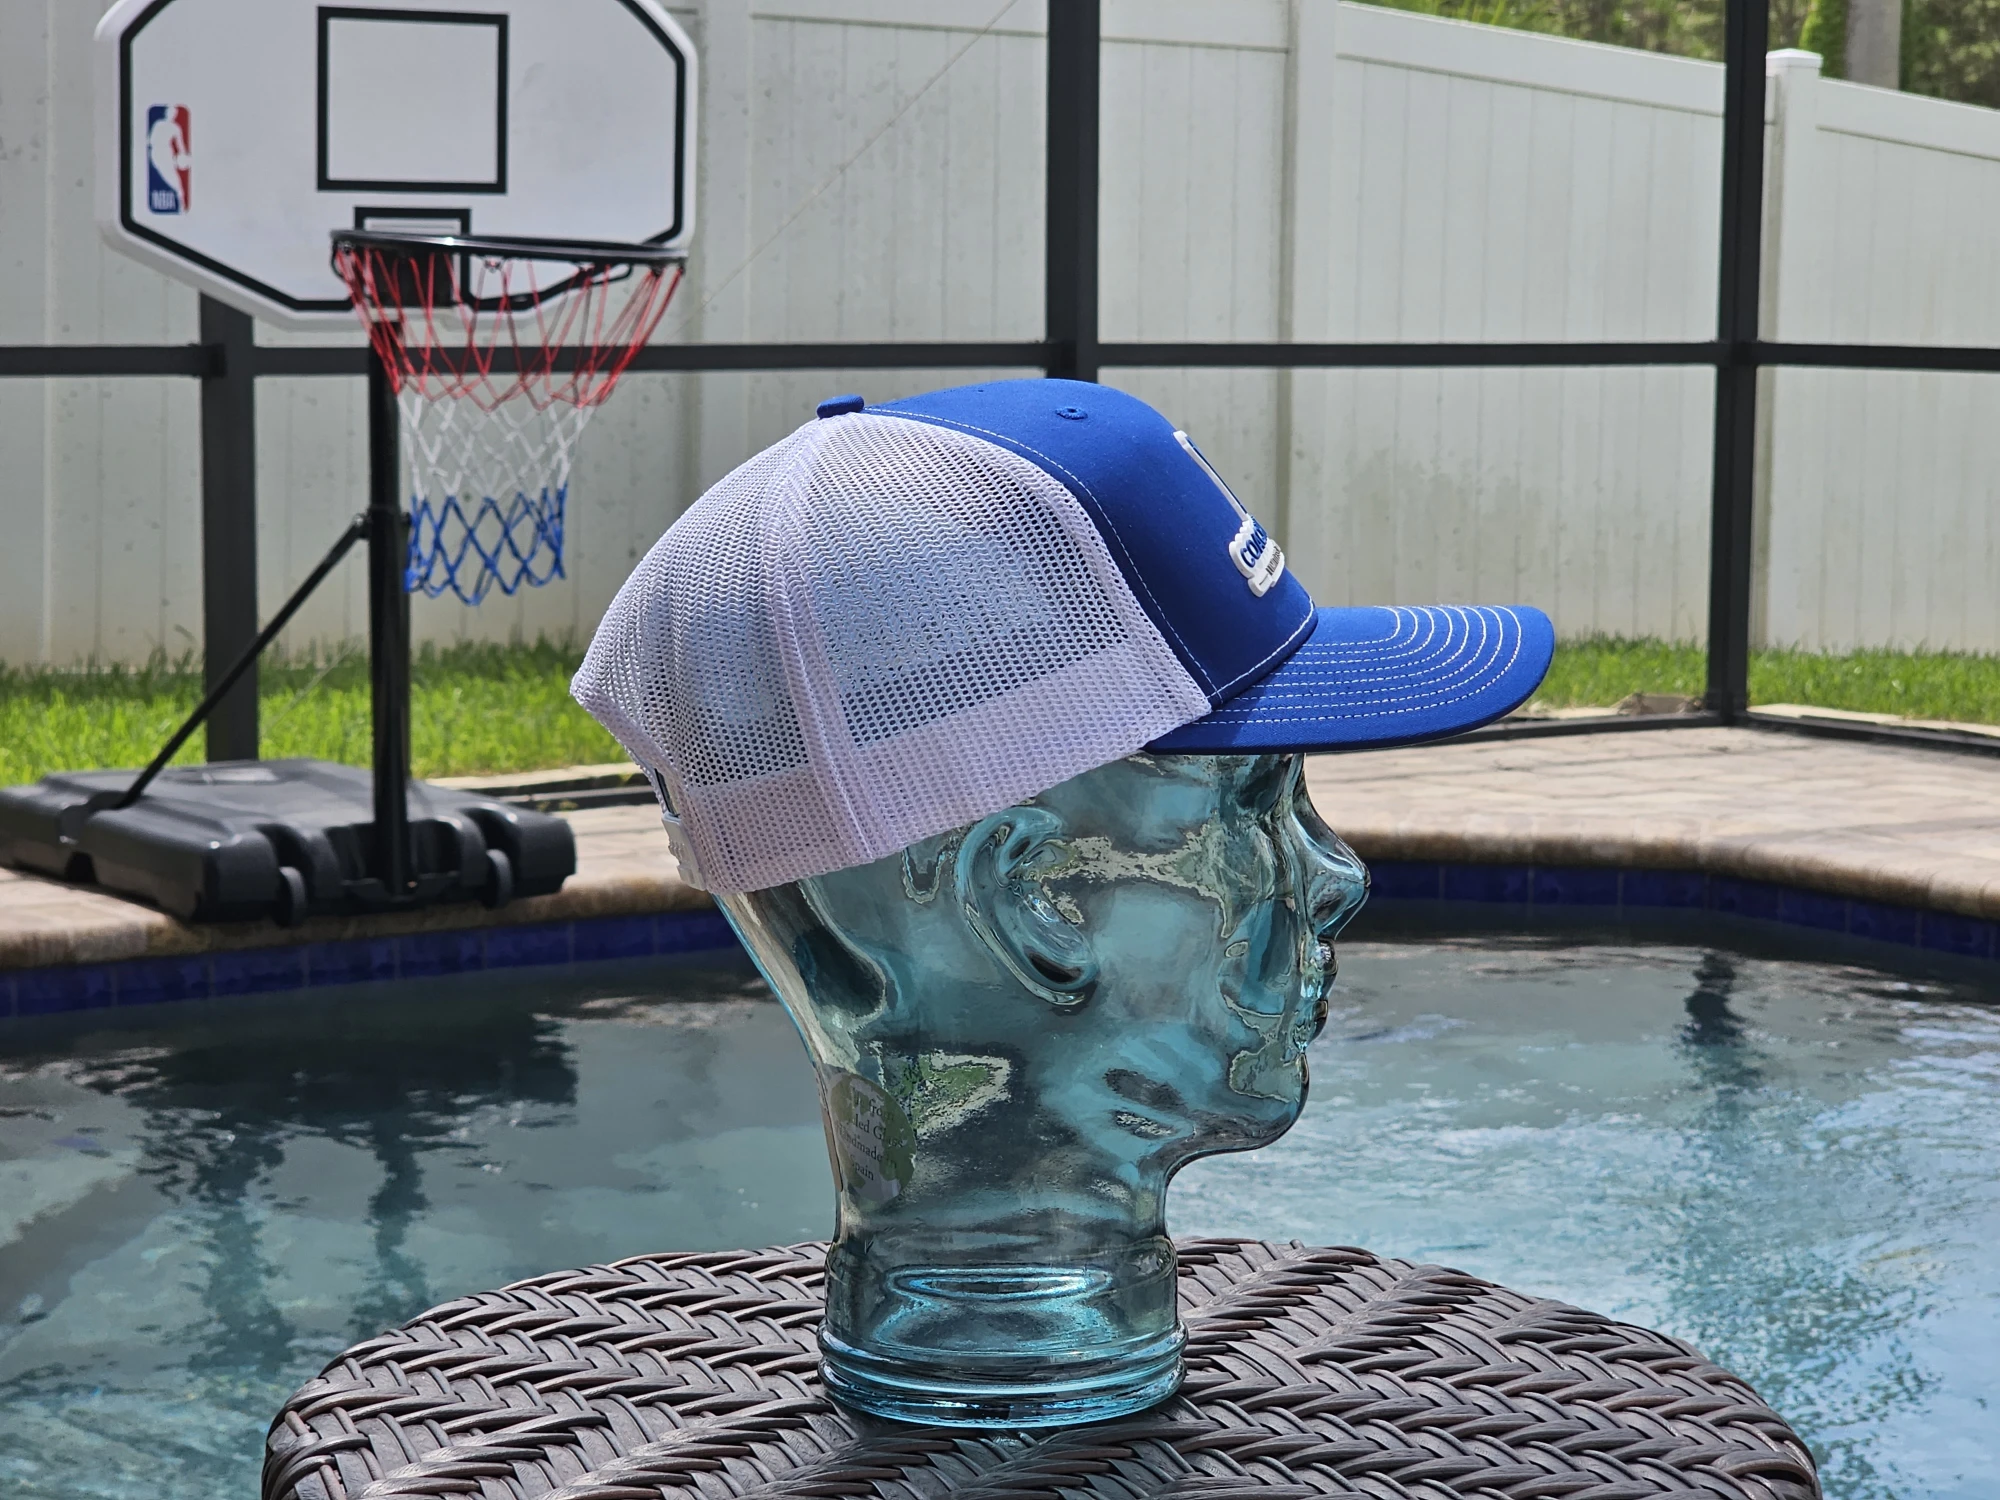 item Hat - Snap Back - Blue Panel with Blue Bill, White Stitching, White Mesh and Snaps cmlpc-hat_snap-bluwhtwht-2